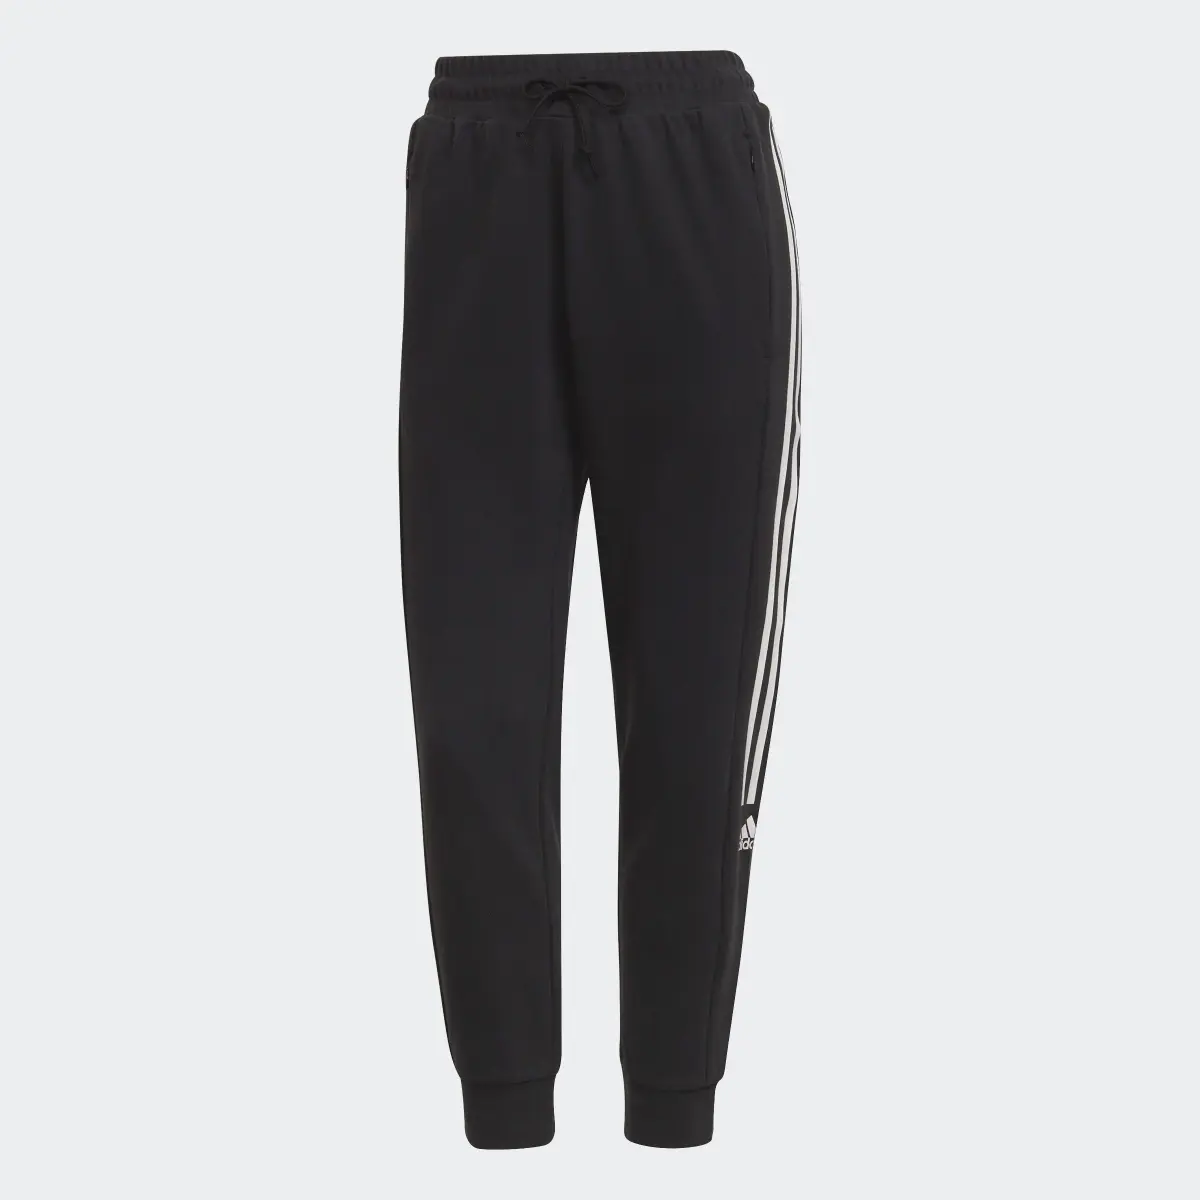 Adidas AEROREADY Made for Training Cotton-Touch Pants. 1